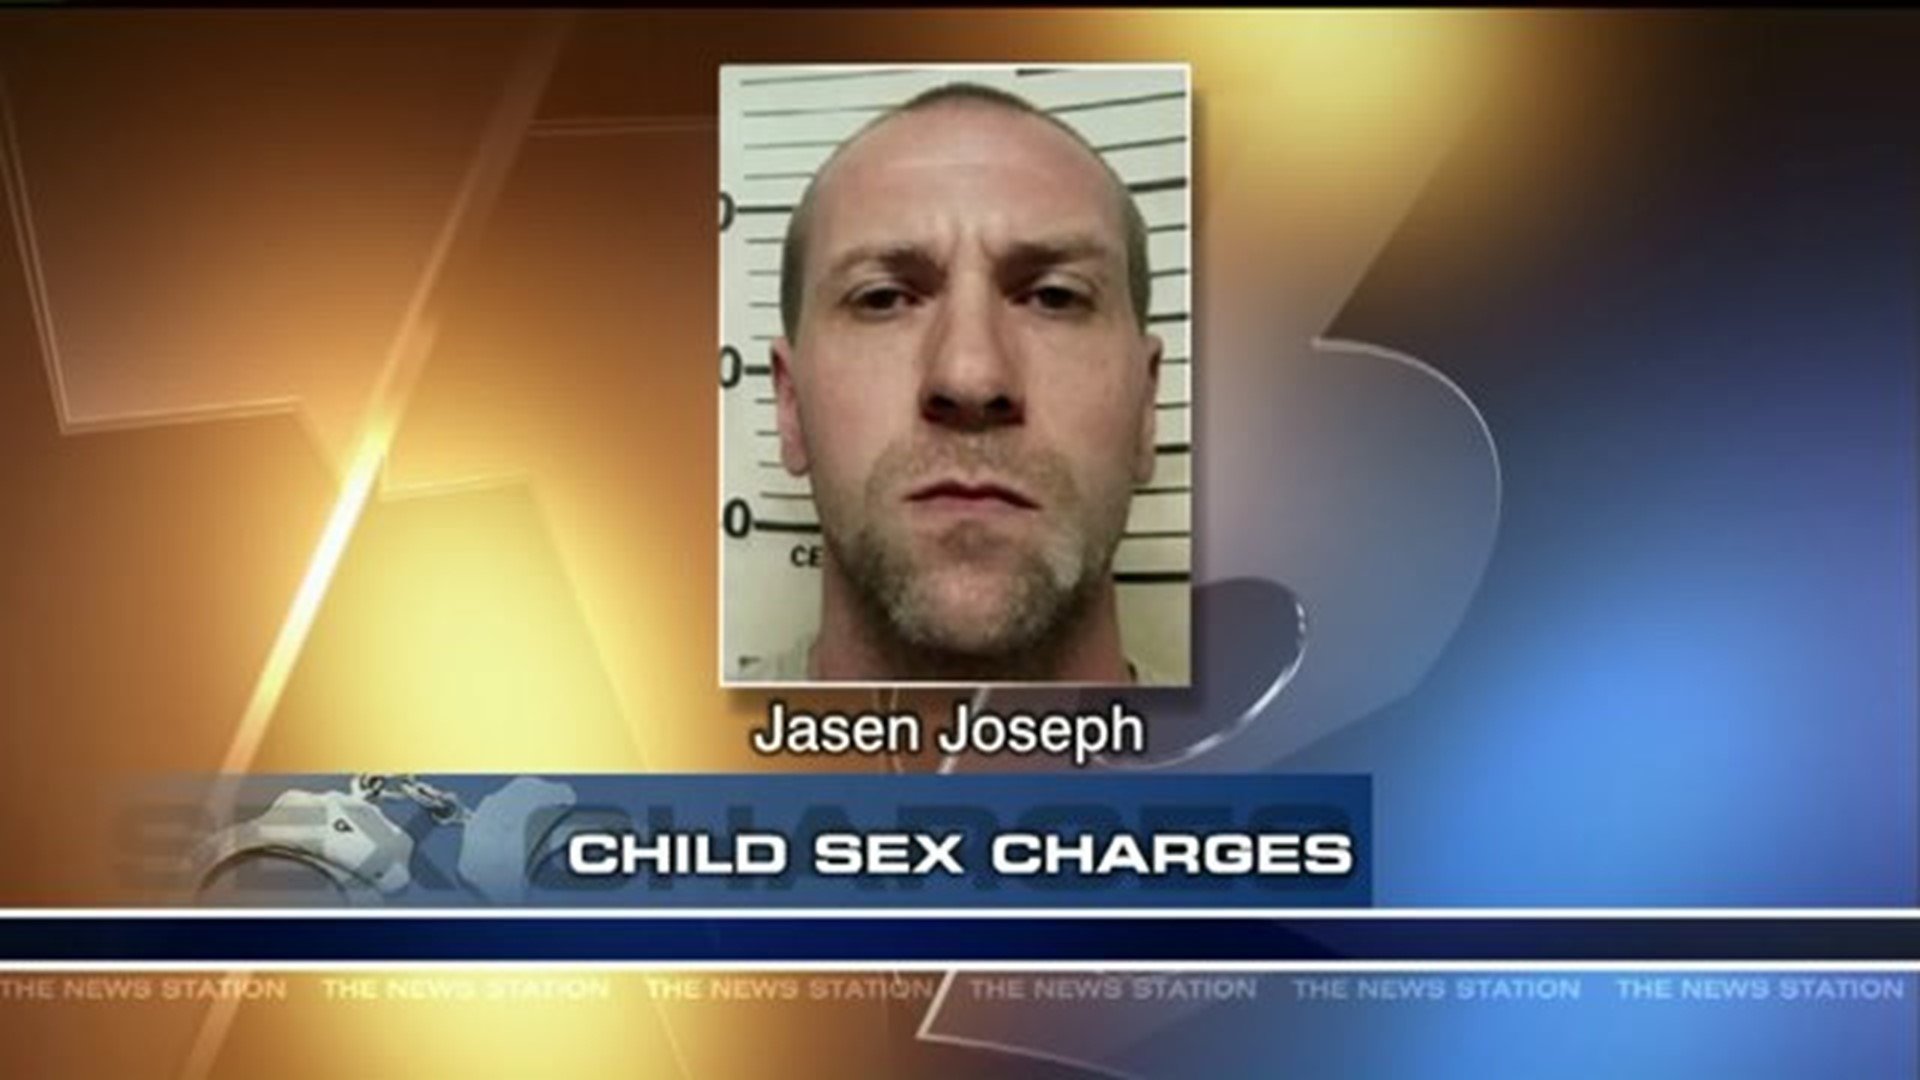 Police: Schuylkill County Man Forced Child to Watch Porn